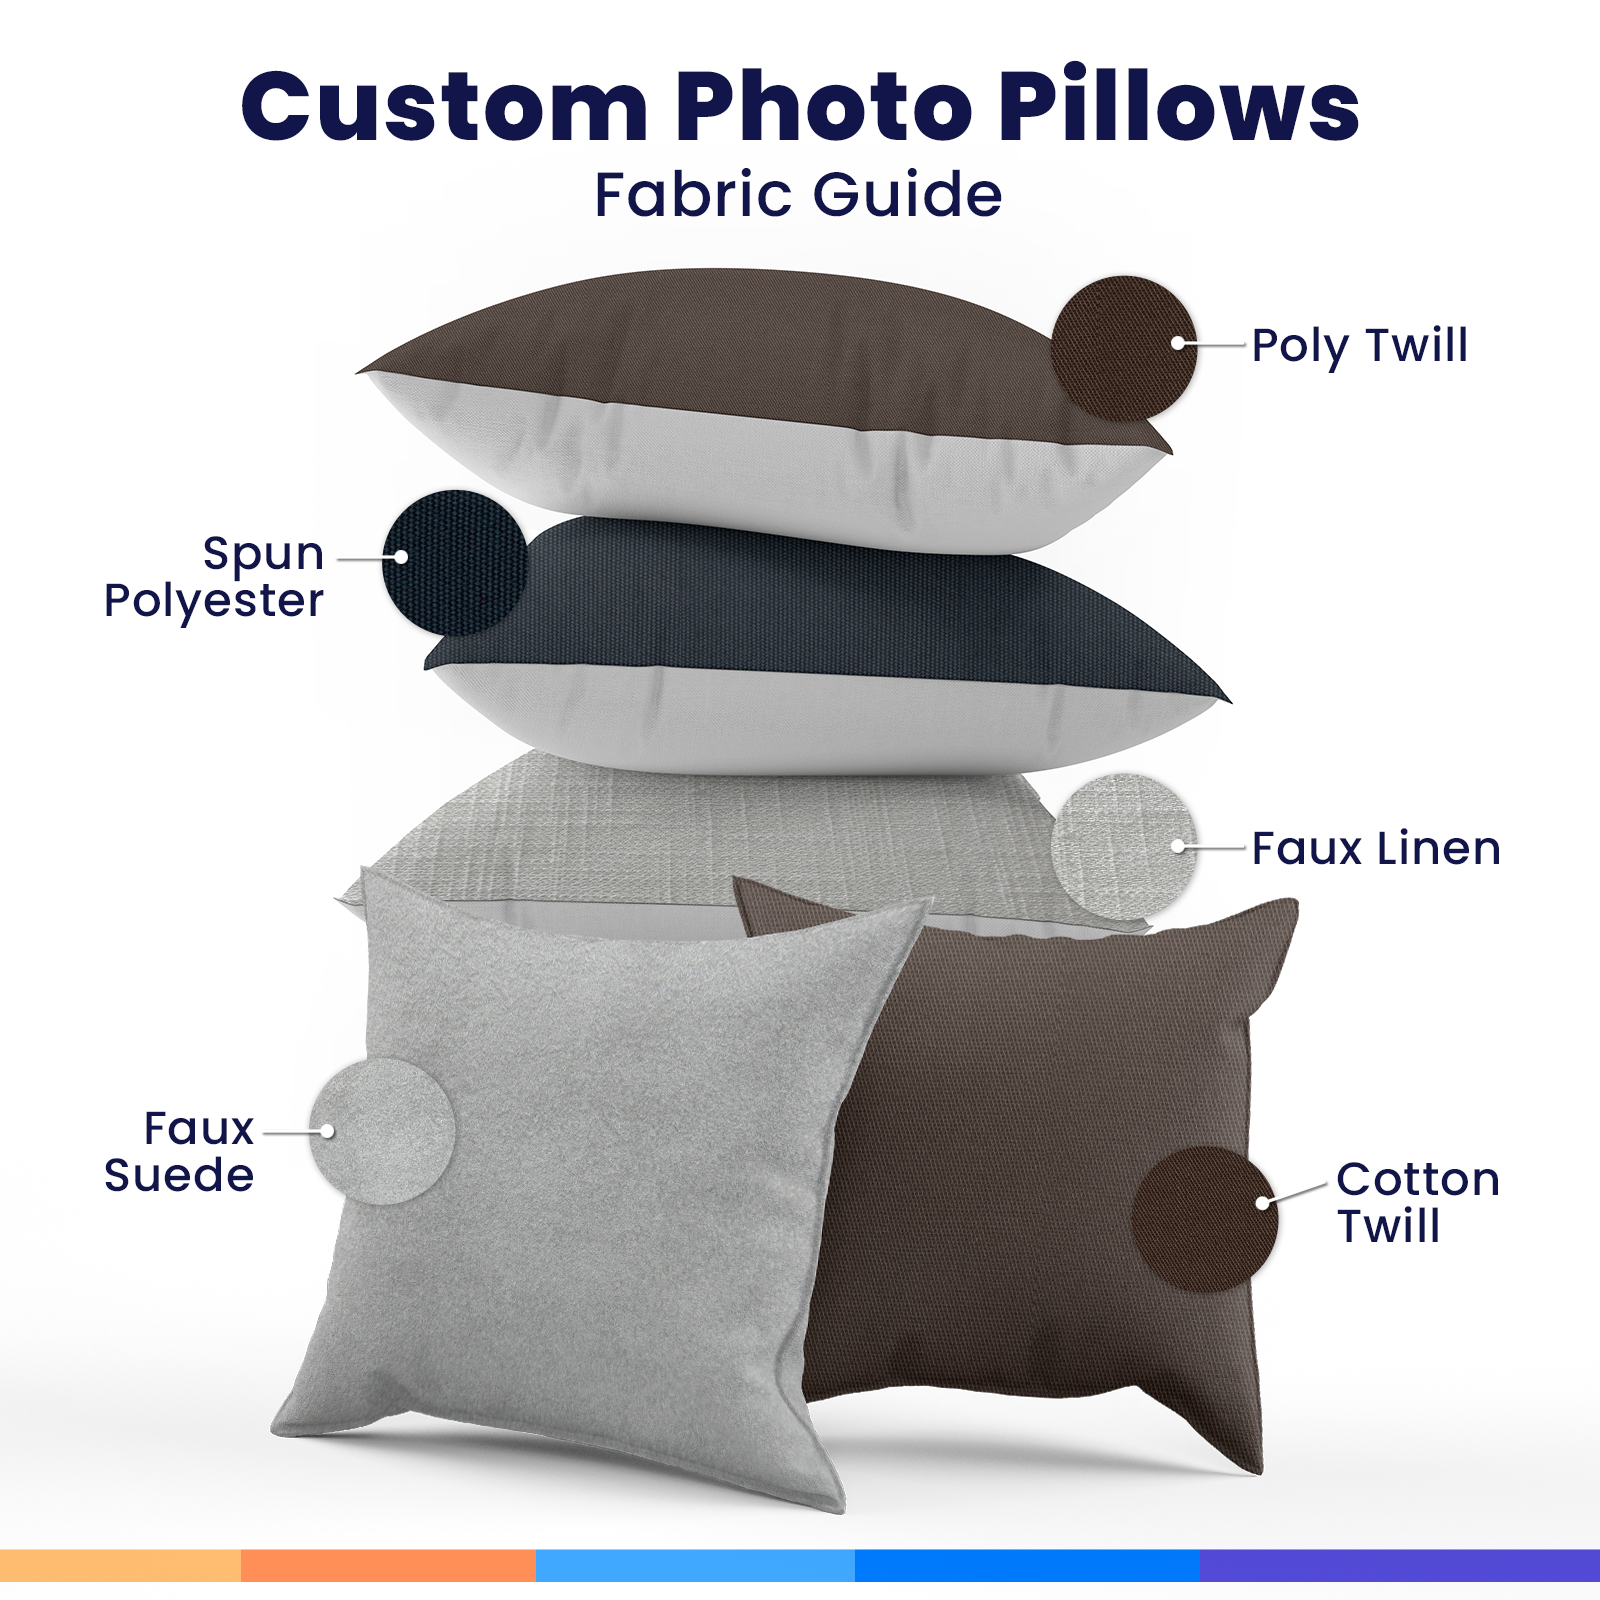 Family What Counts Most Custom Photo Pillow